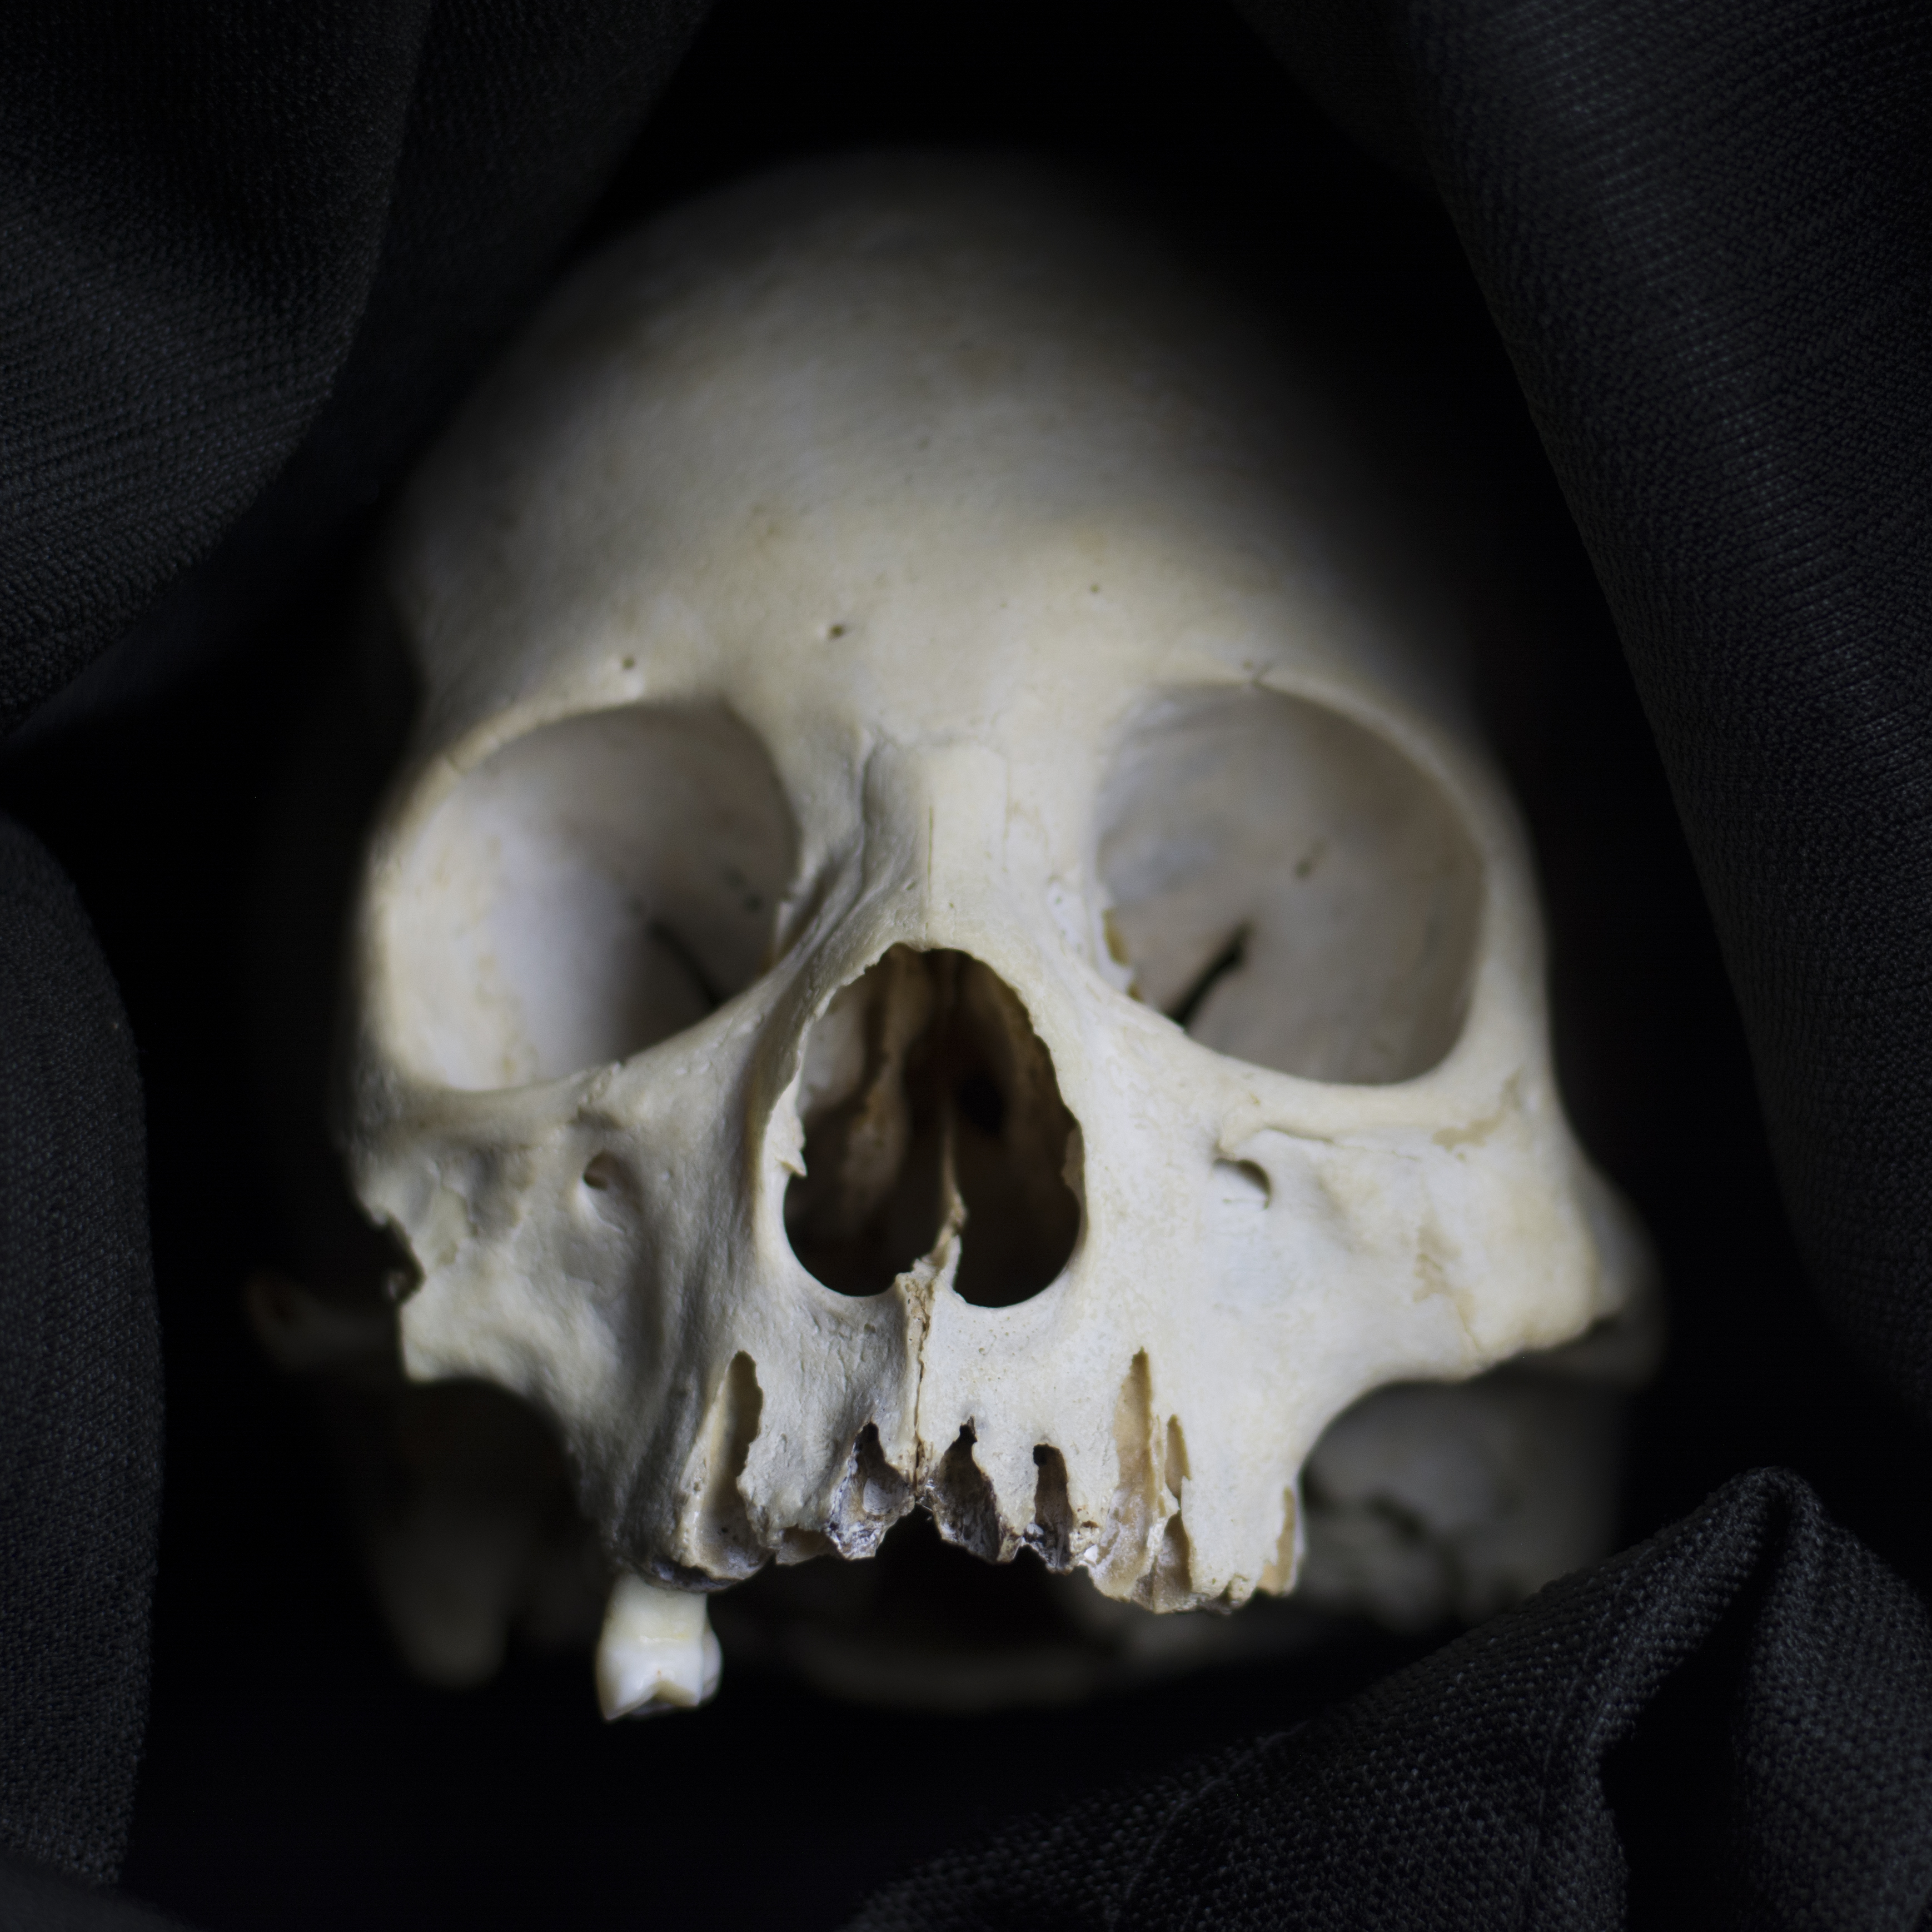 5 Weird Facts About The Human Skull And 5 High Res Images